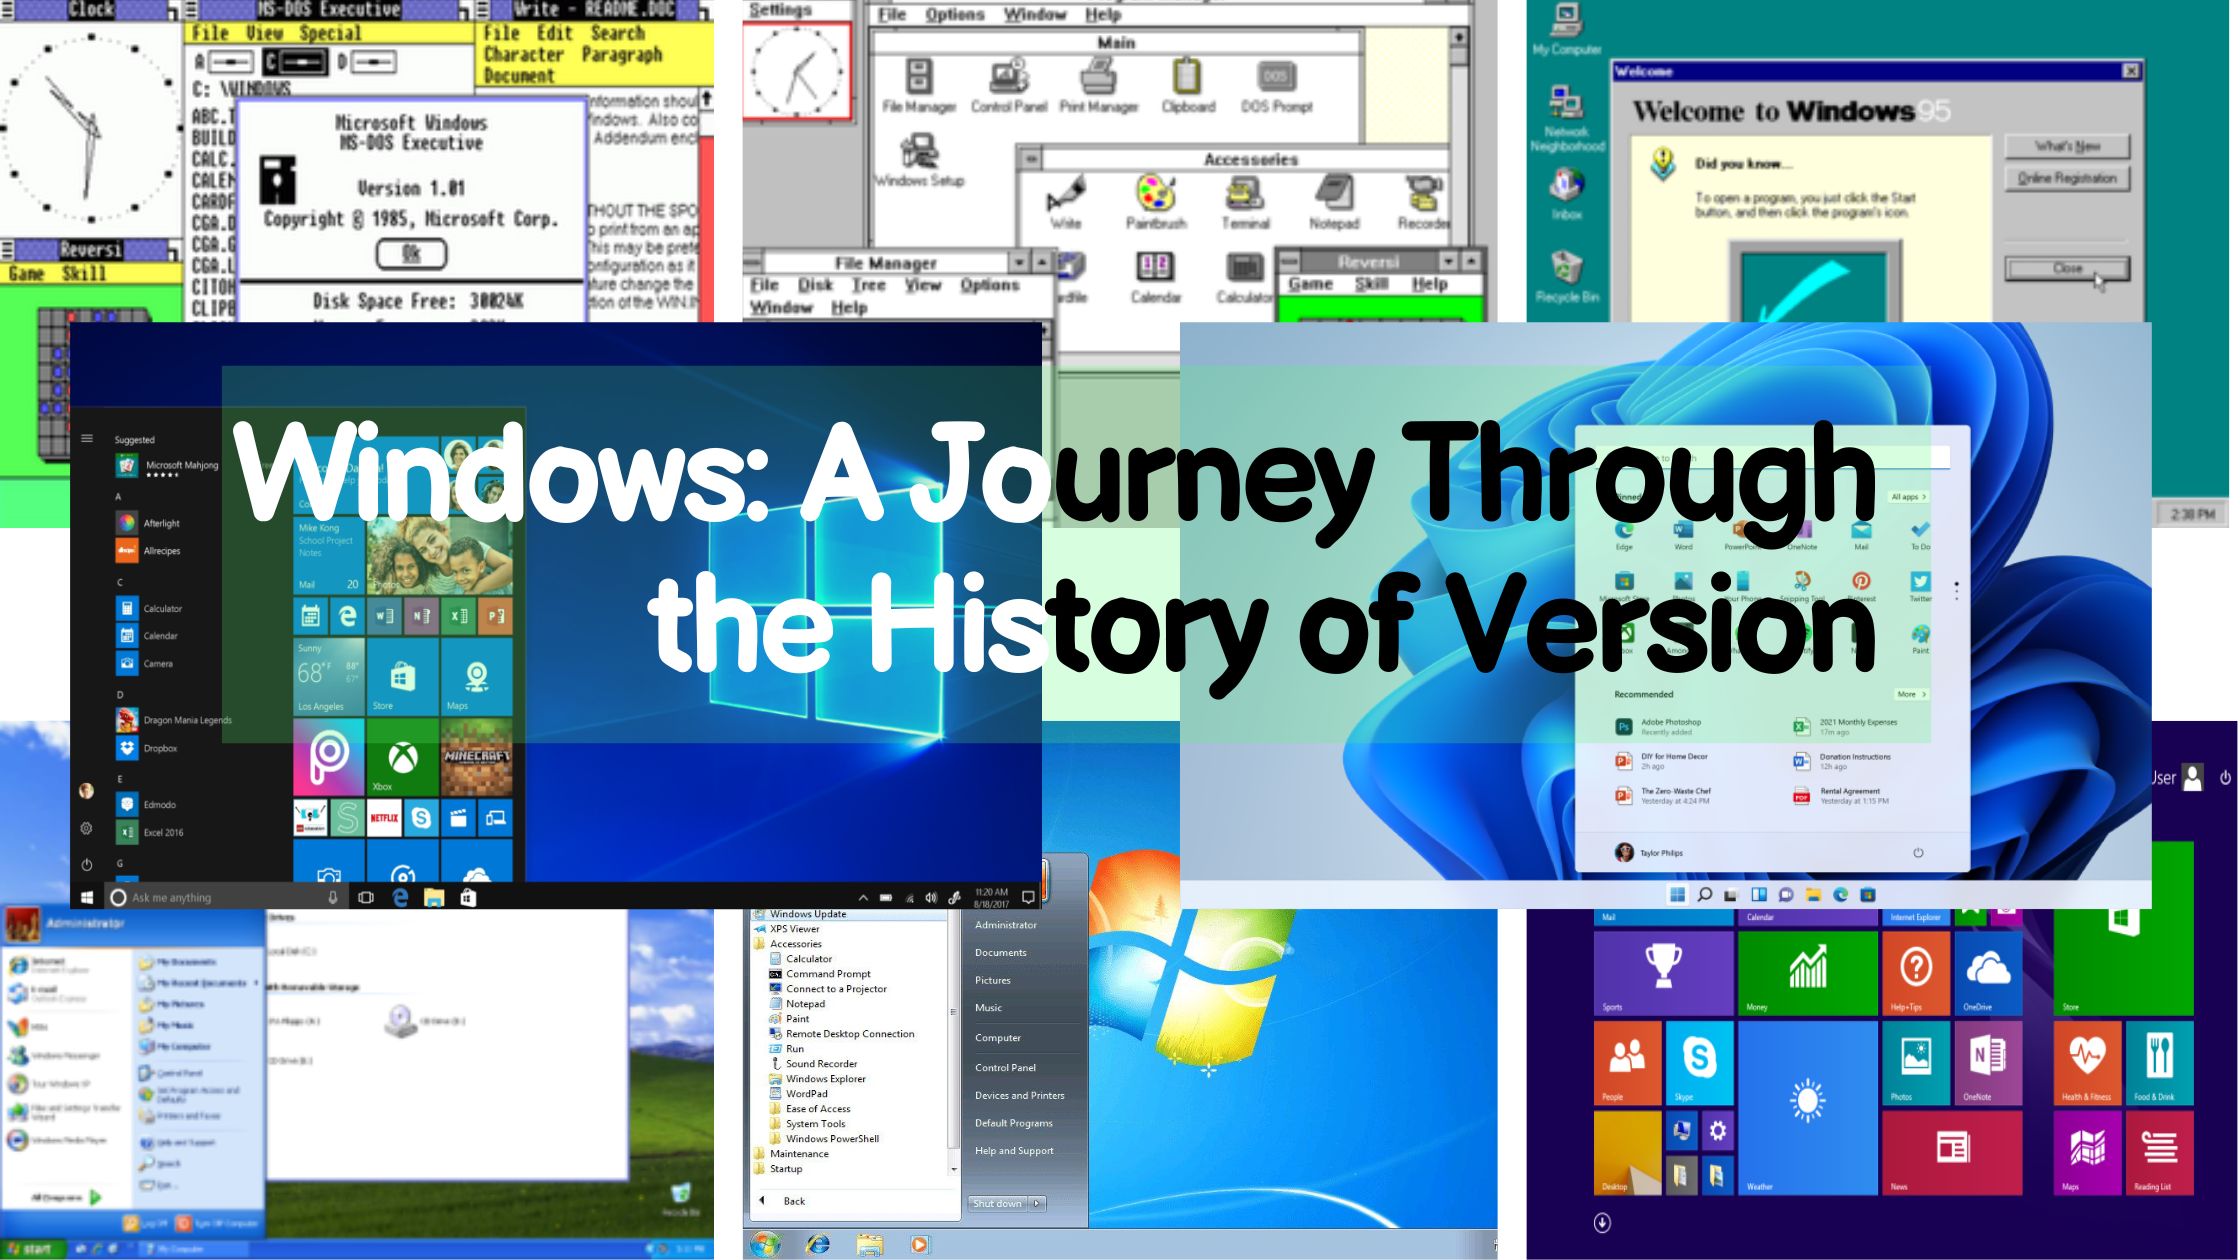 Windows: A Journey Through the History of Version